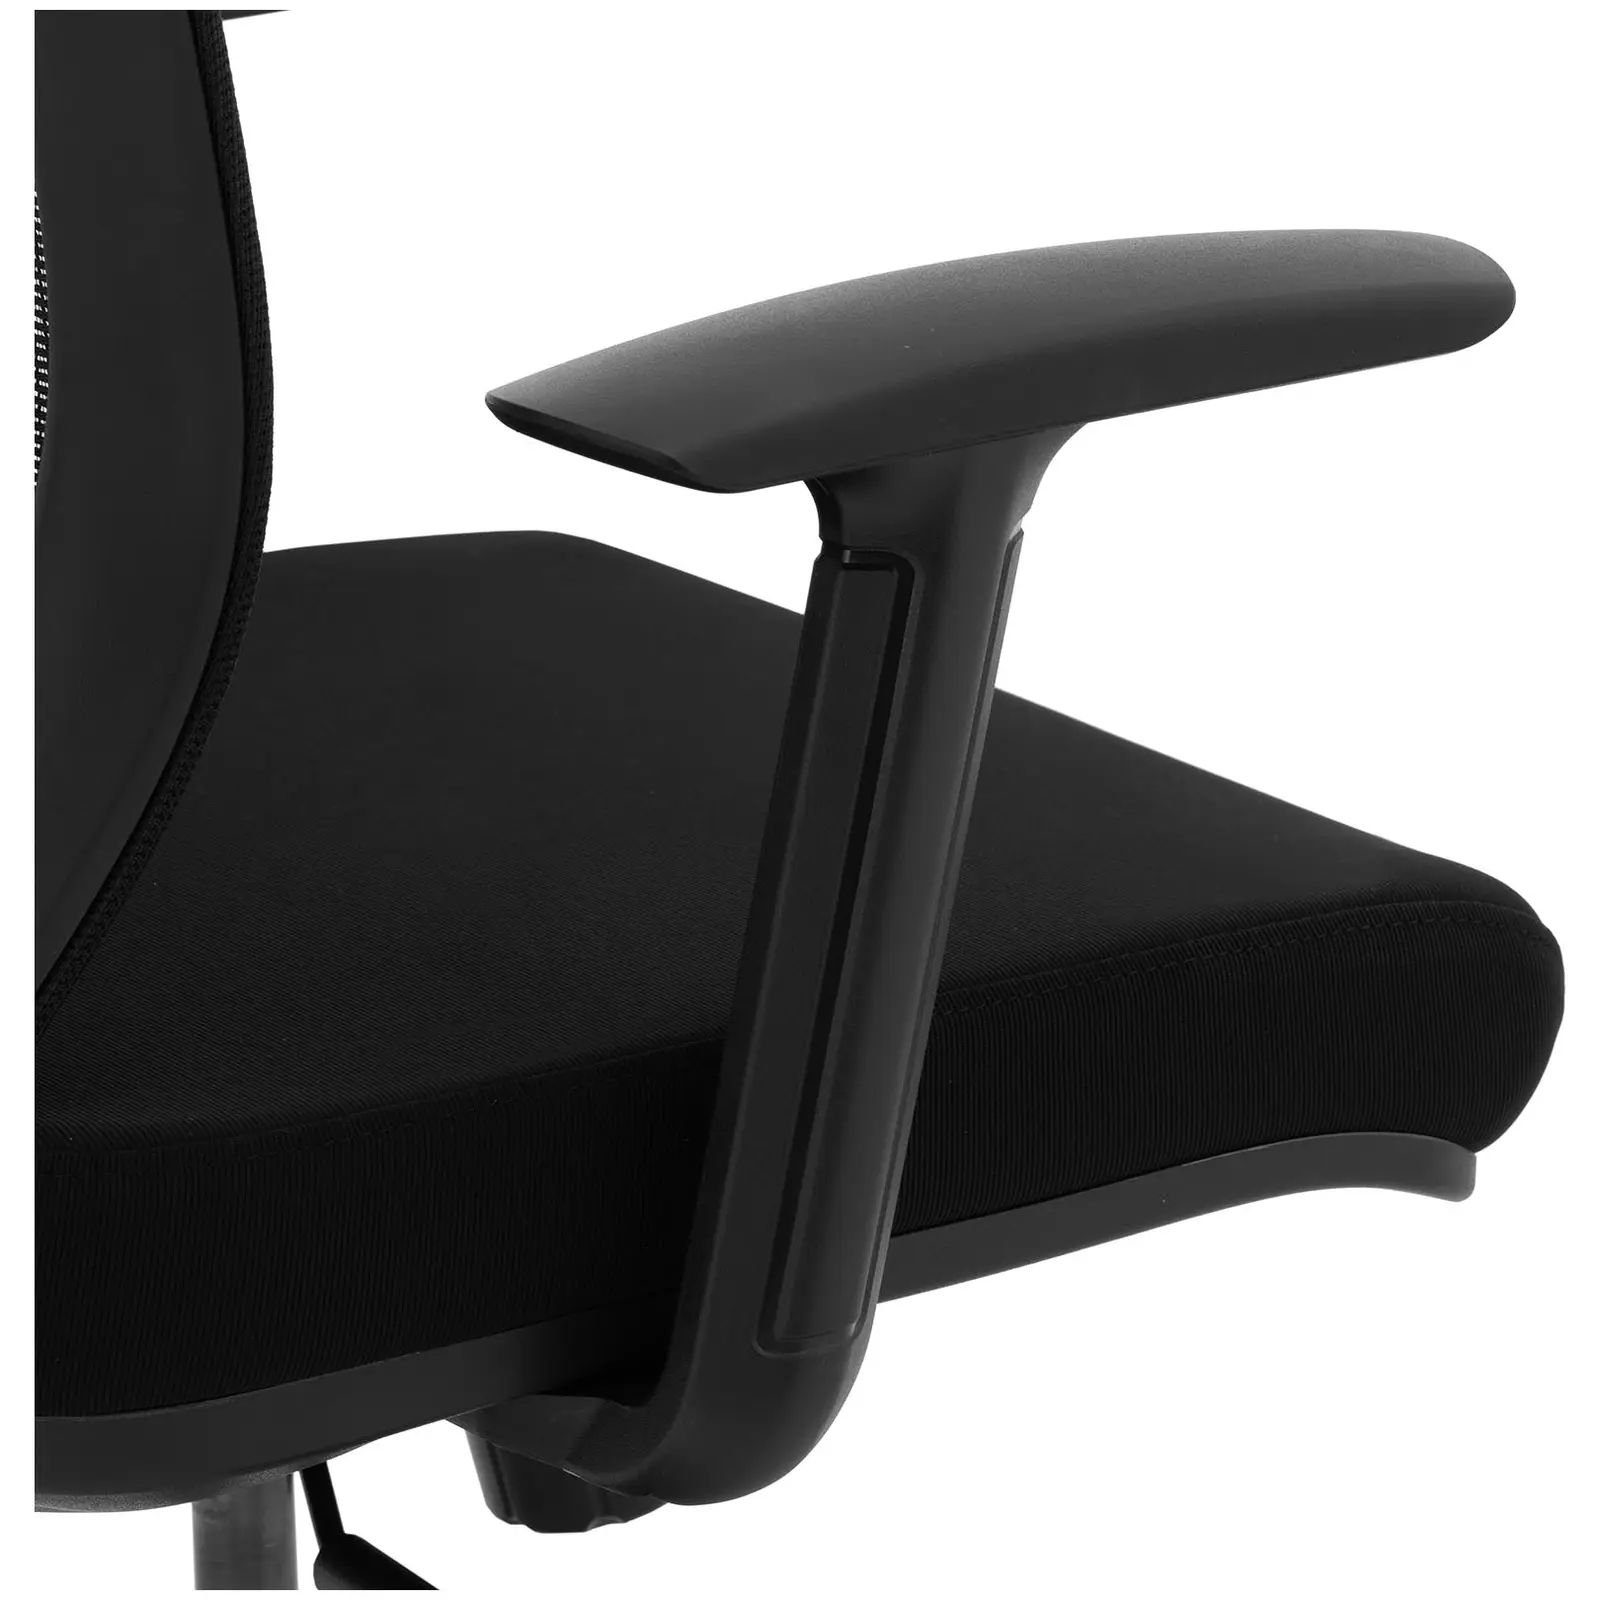 Office Chair - mesh back - headrest - 50 x 50 cm seat - up to 150 kg - black